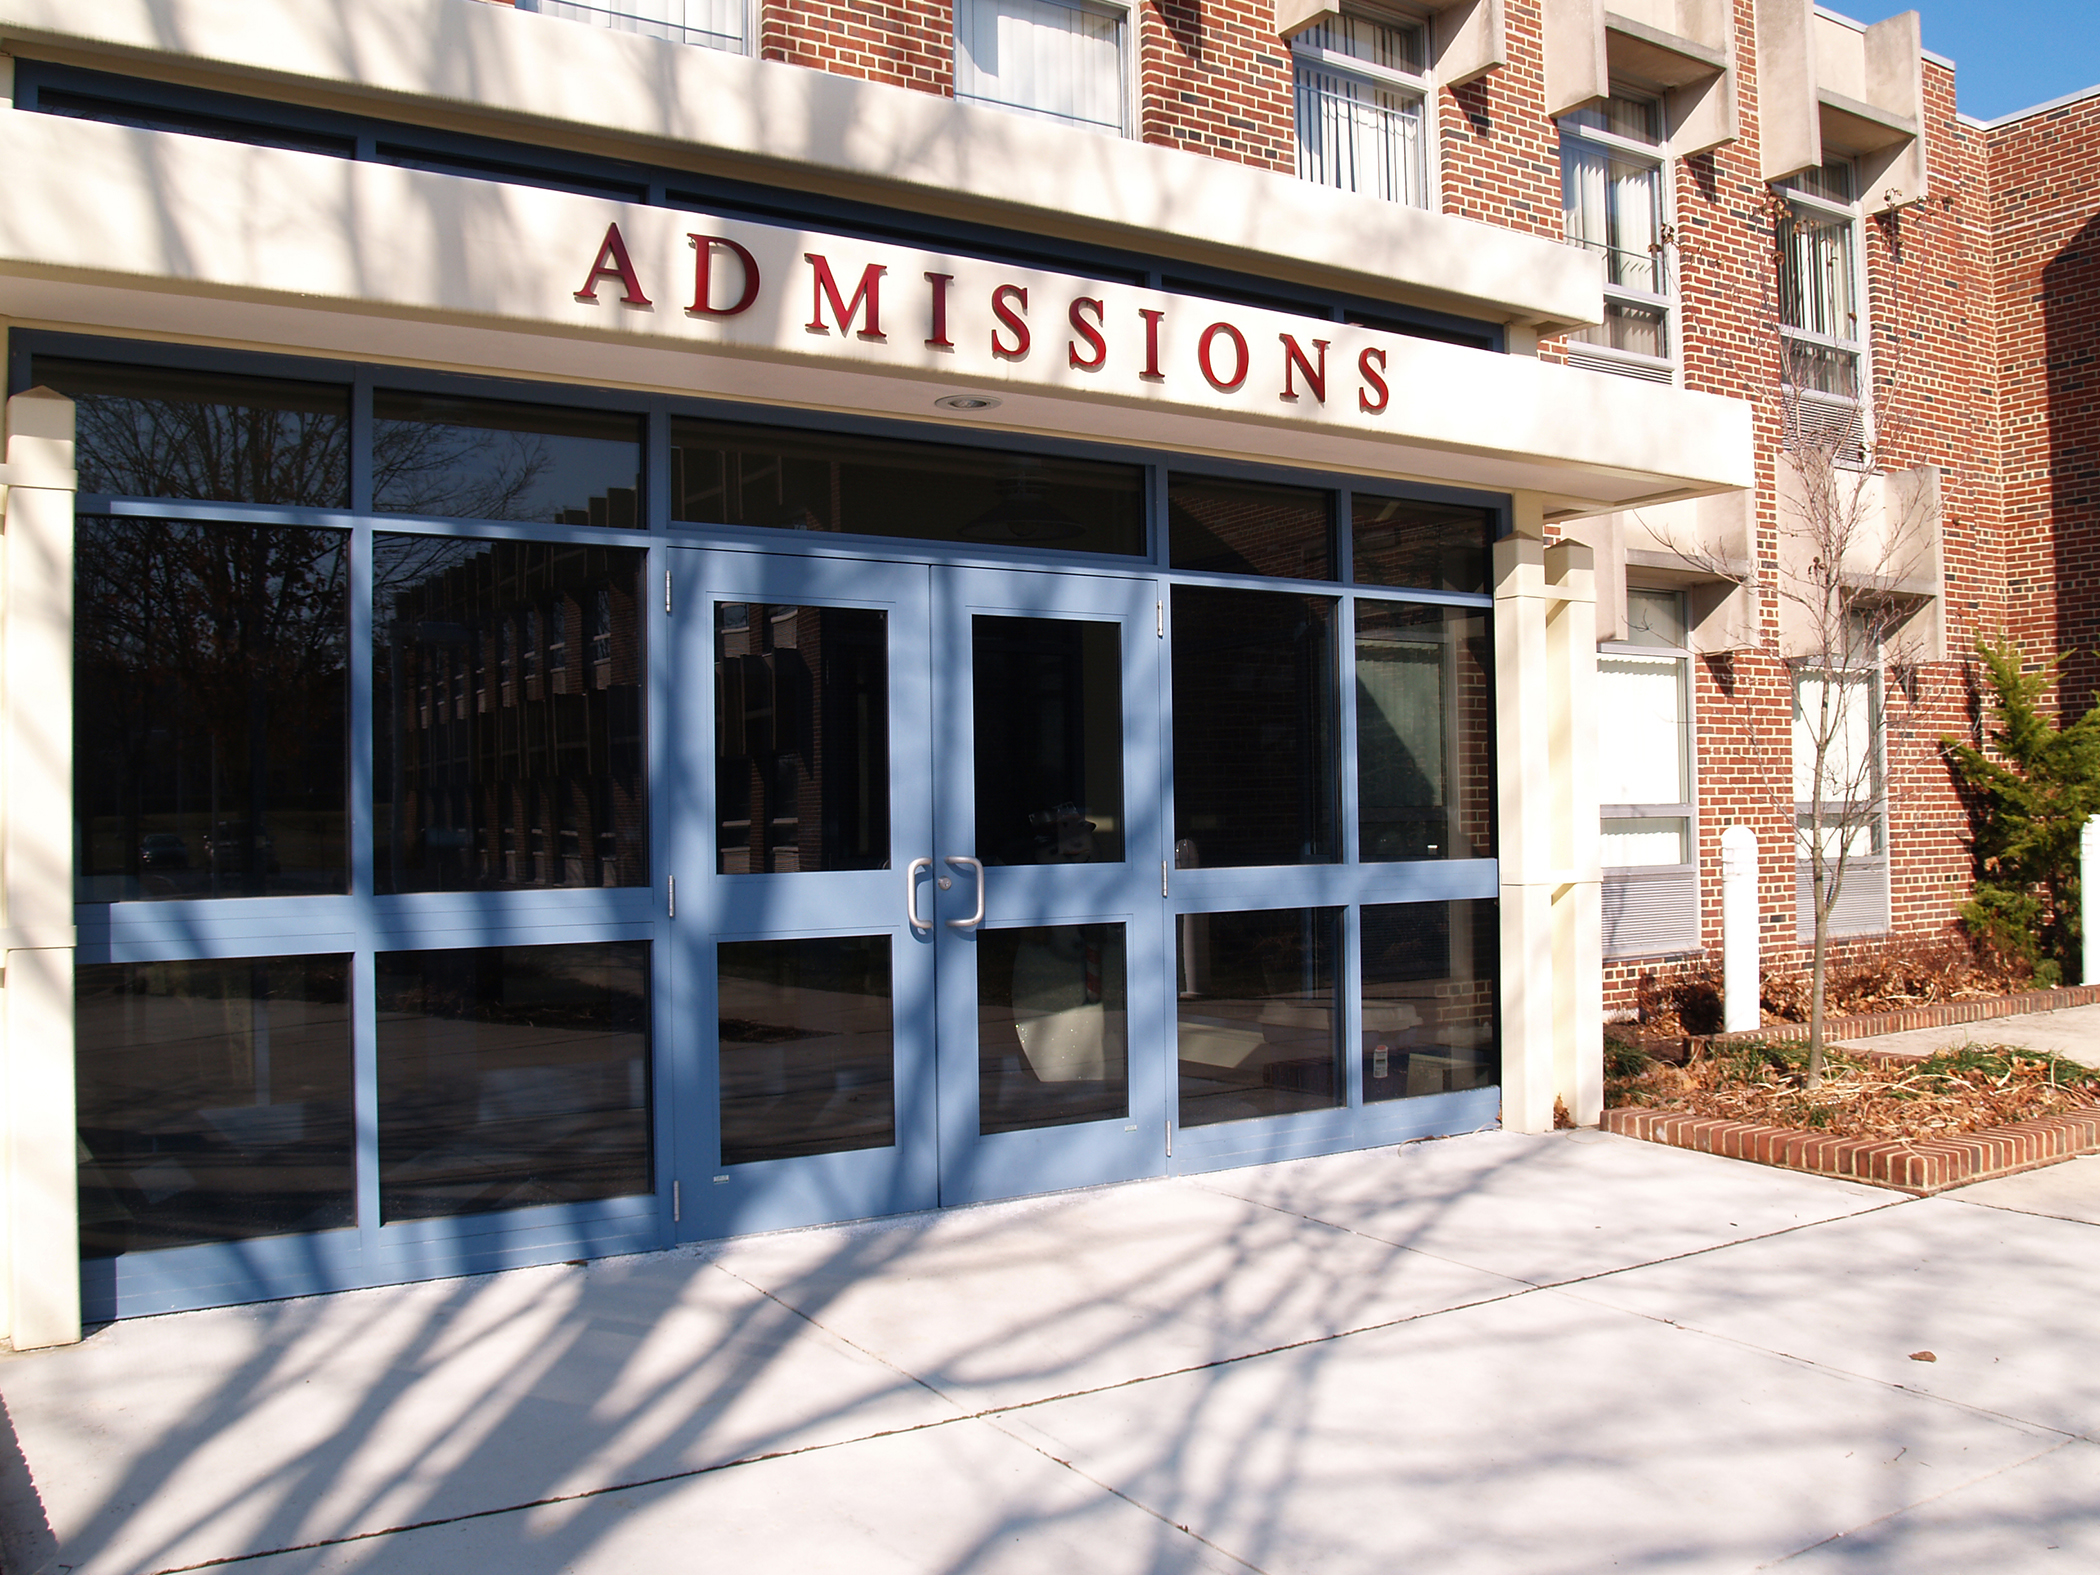 What Really Goes on in a College Admissions Office?